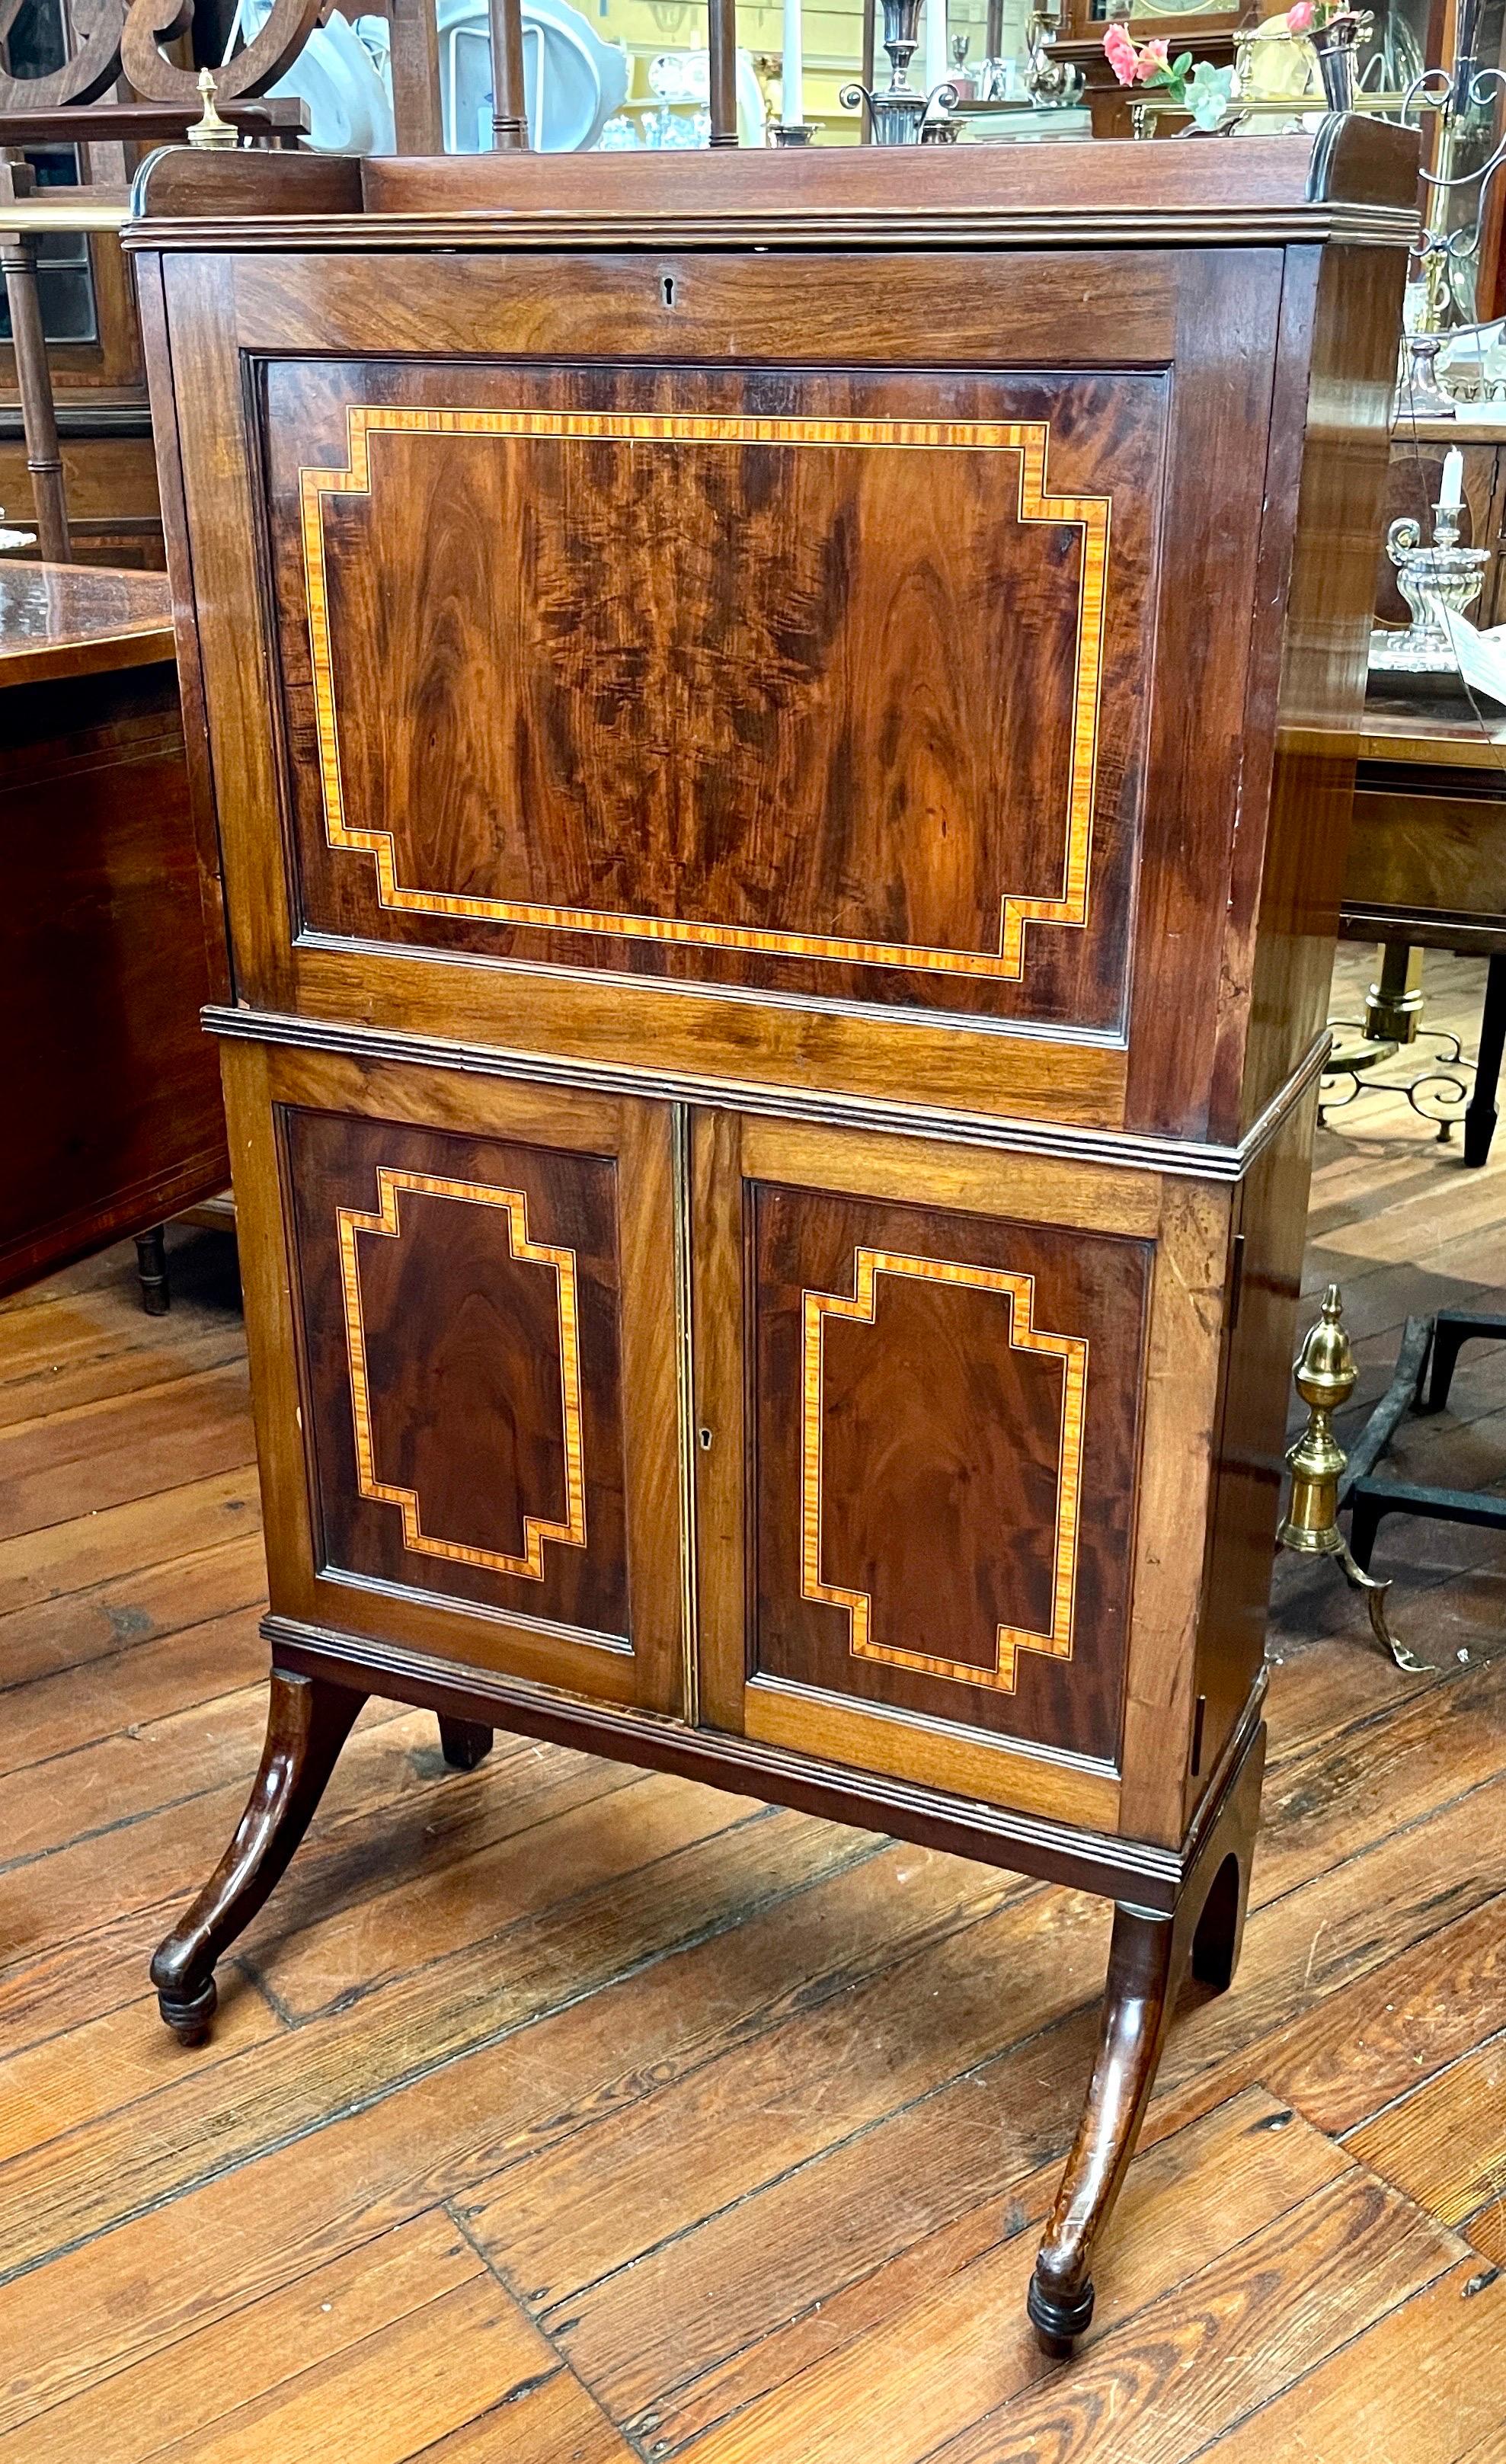 This is a wonderful and rare Antique English small or diminutive Abbatant a' Secretaire or Bonheur du Jour Writing Table and is unique and wonderful.  The exterior is exquisitely made from bookmatched flame or crotch mahogany with a wide banding of